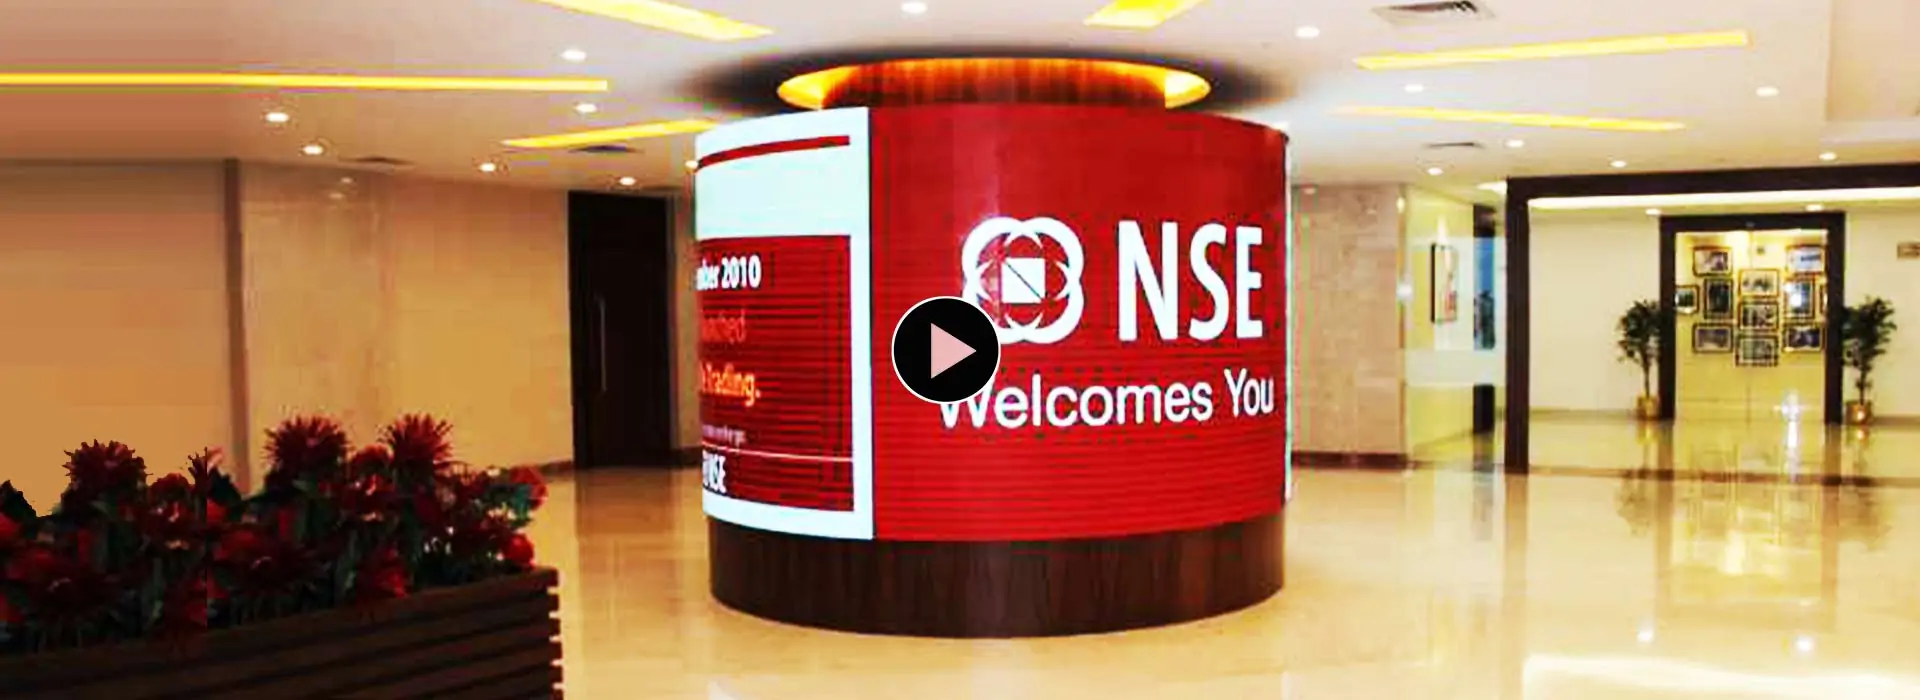 LED Displays for Banking and Finance Industry